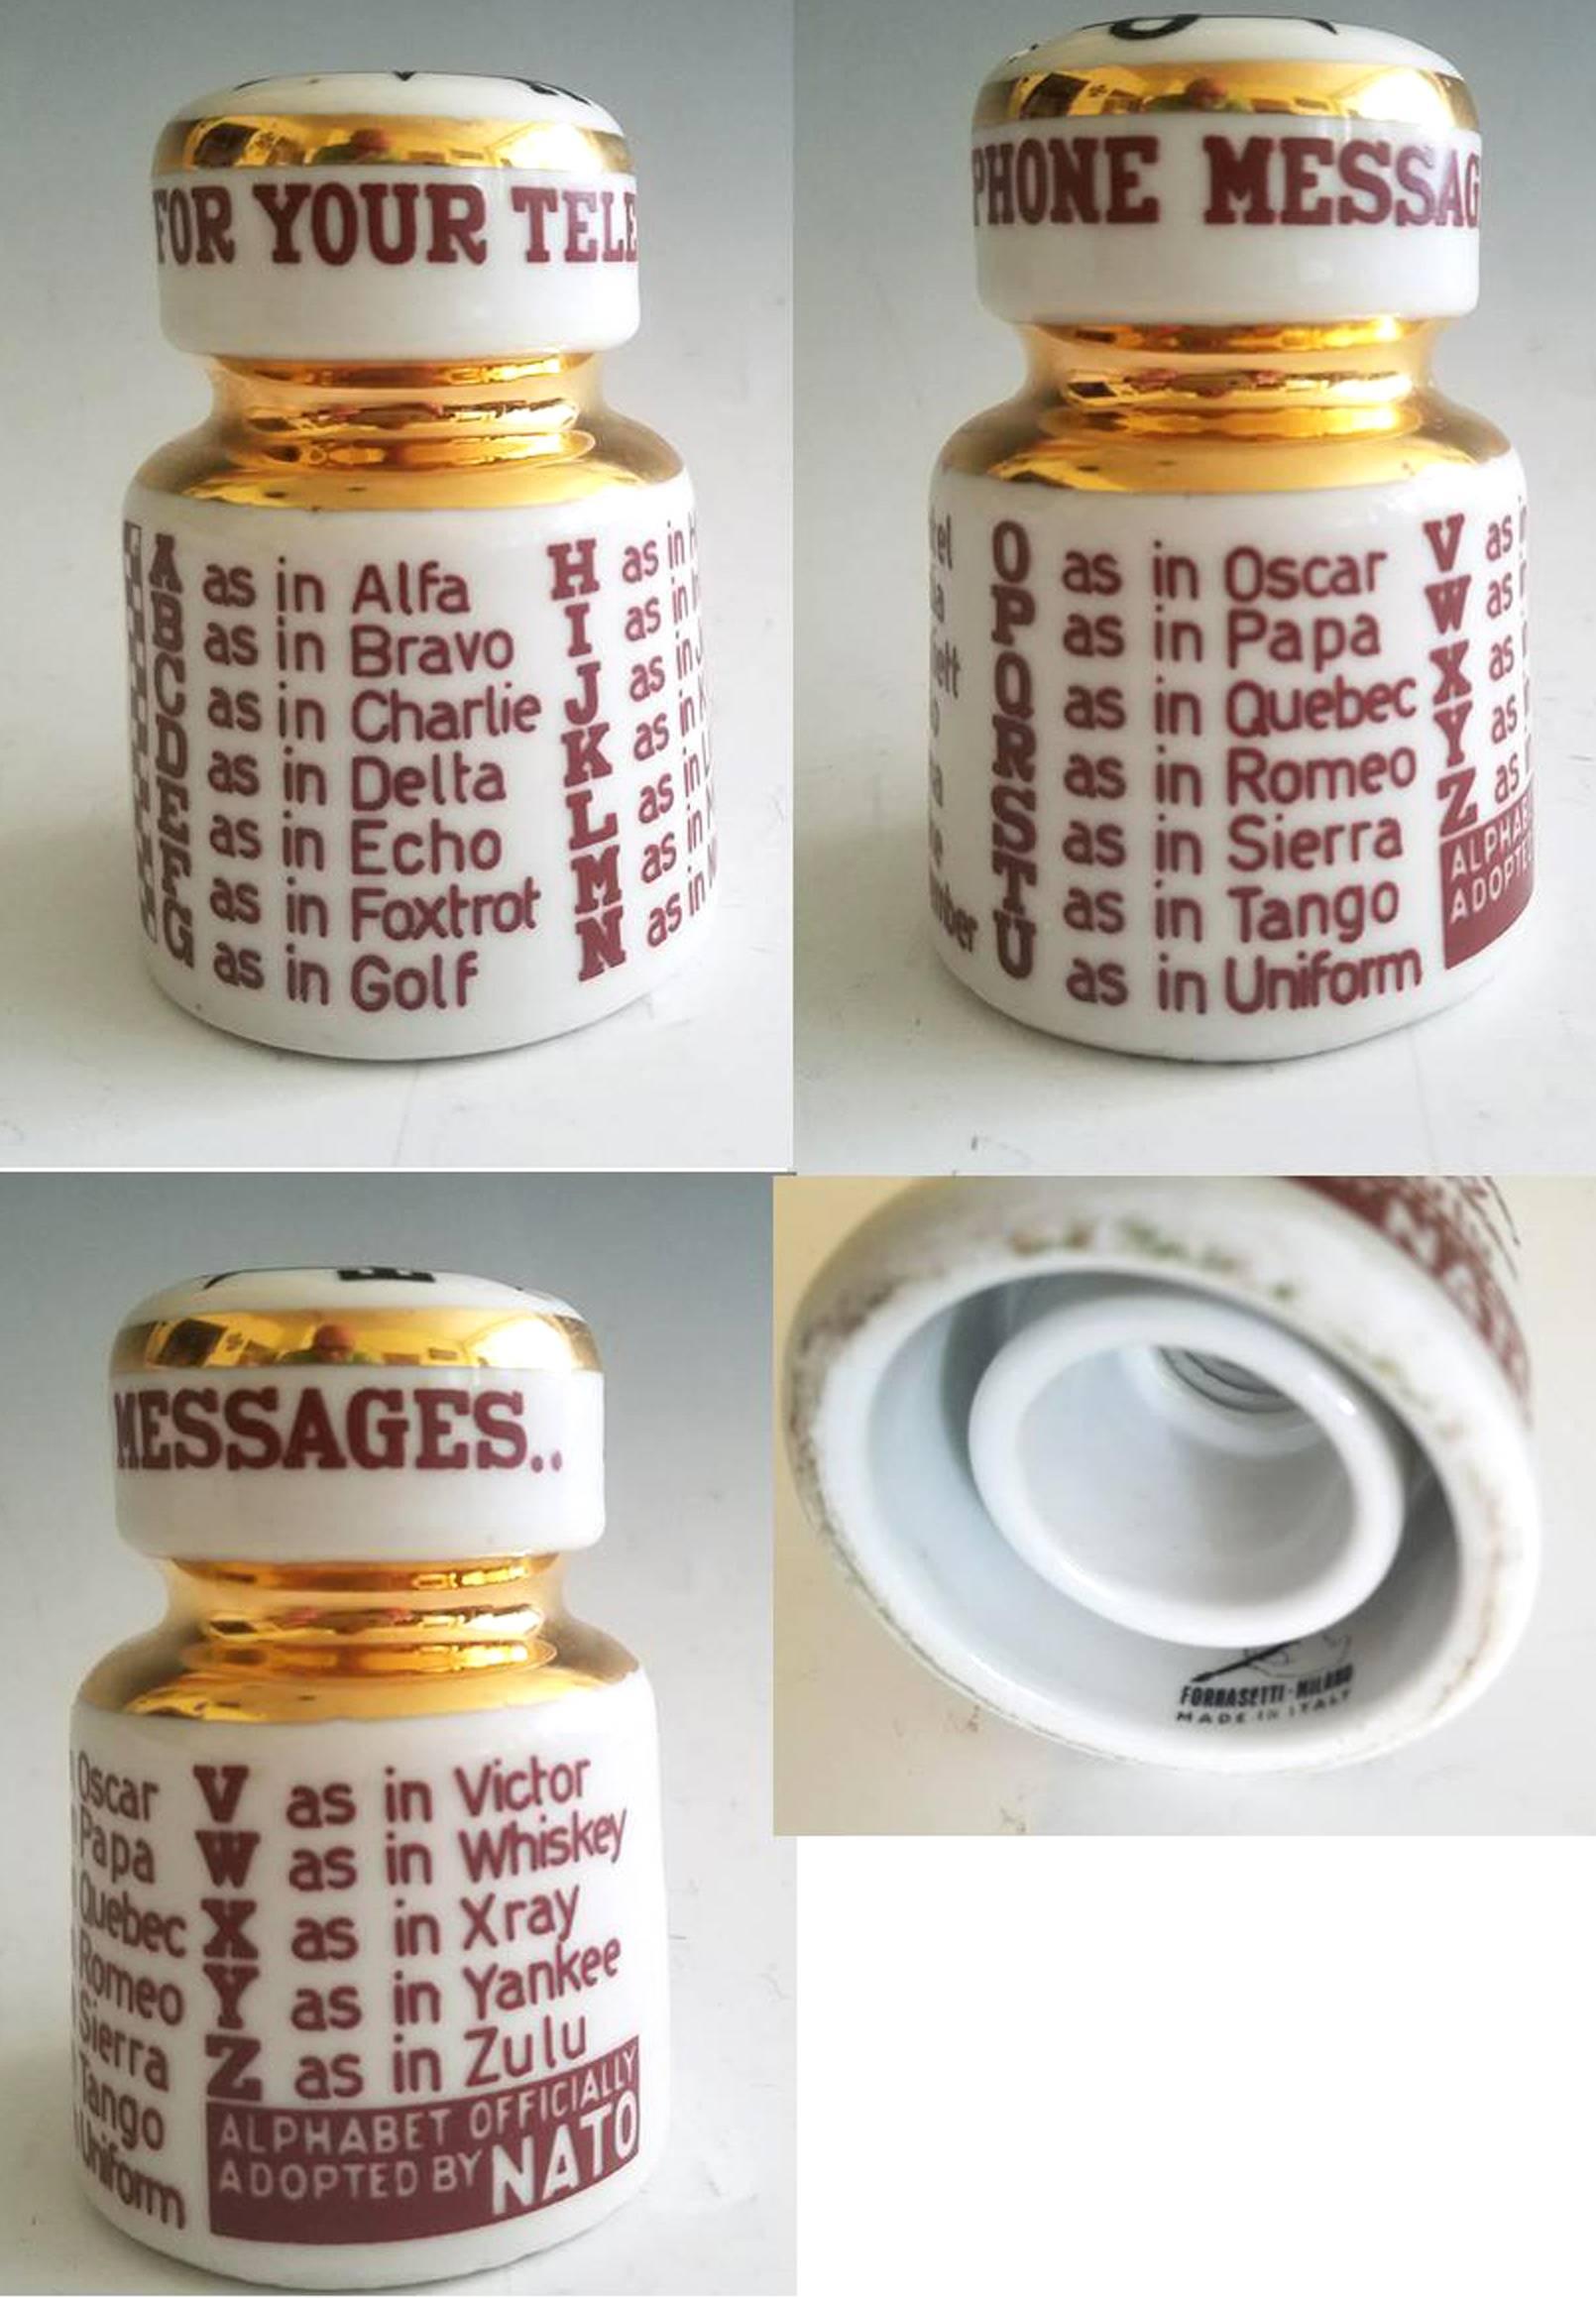 Piero Fornasetti NATO Call Letters paperweight in form of an electrical insulator,
1950s.

This is a great and rather rare piece from Italian designer Piero Fornasetti's line of ceramic insulators, cleverly repurposed into paperweight pen rests